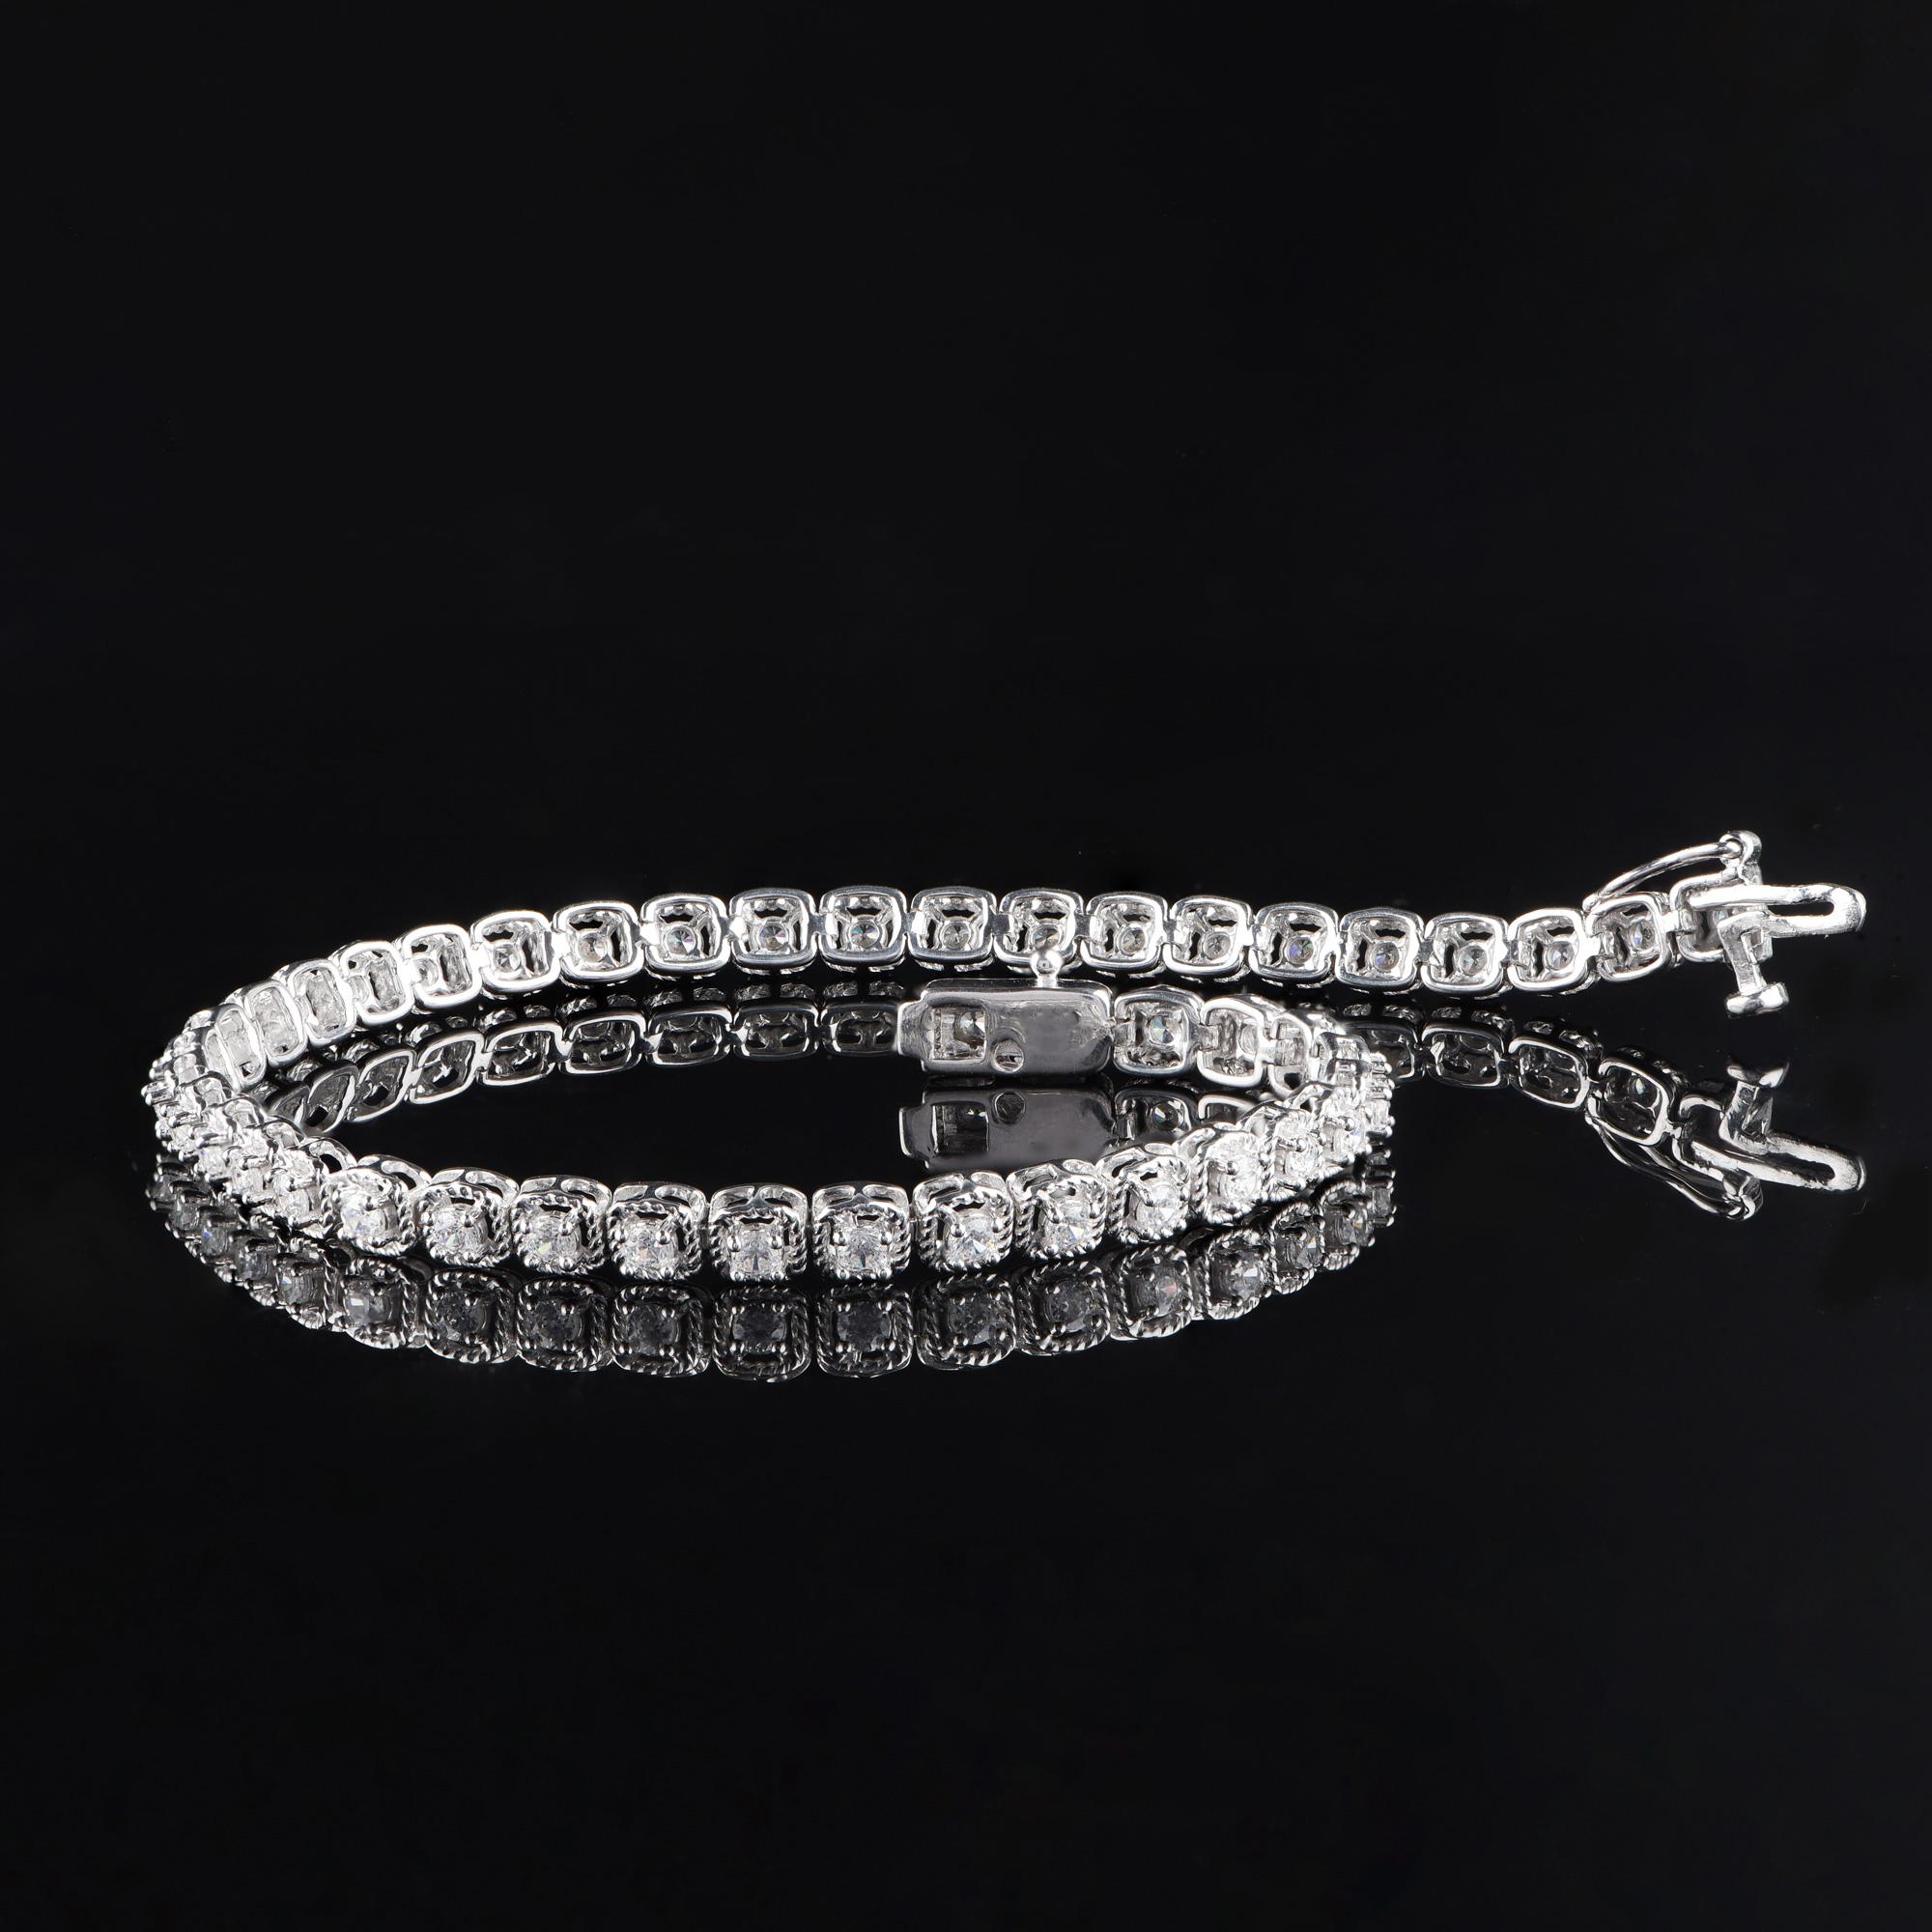 Make your wrist dazzle with designer bracelet studded with 44 brilliant diamonds elegantly set in prong setting and designed beautifully in 18 KT White Gold. The diamonds are graded H-I Color, I2 Clarity.